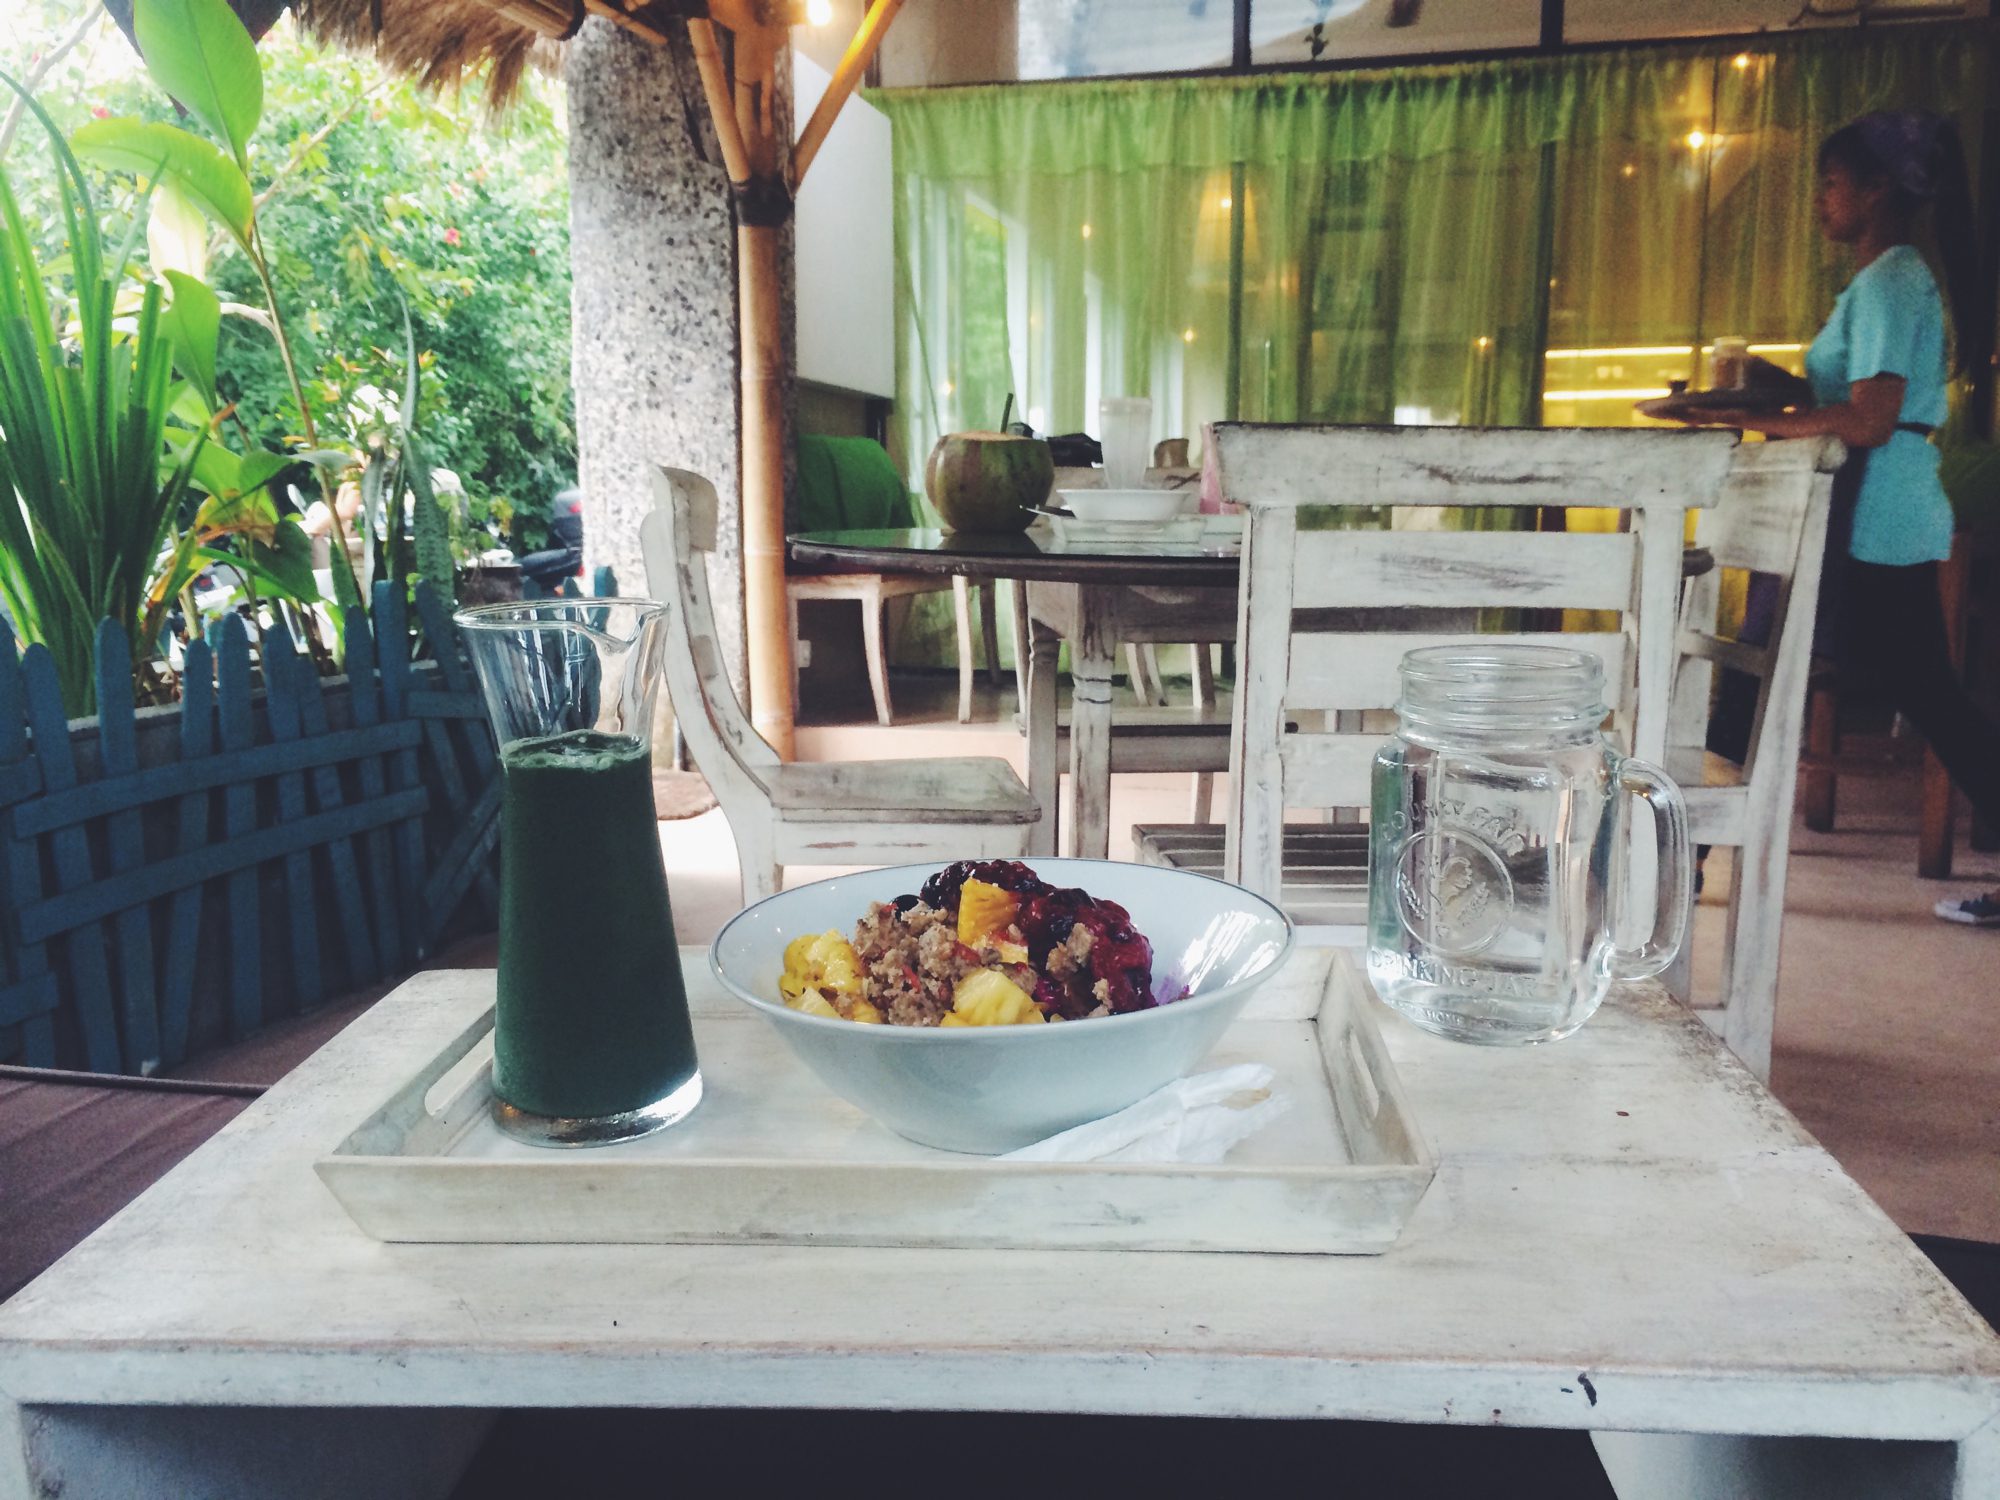 About Bali, organic and the best quinoa salad